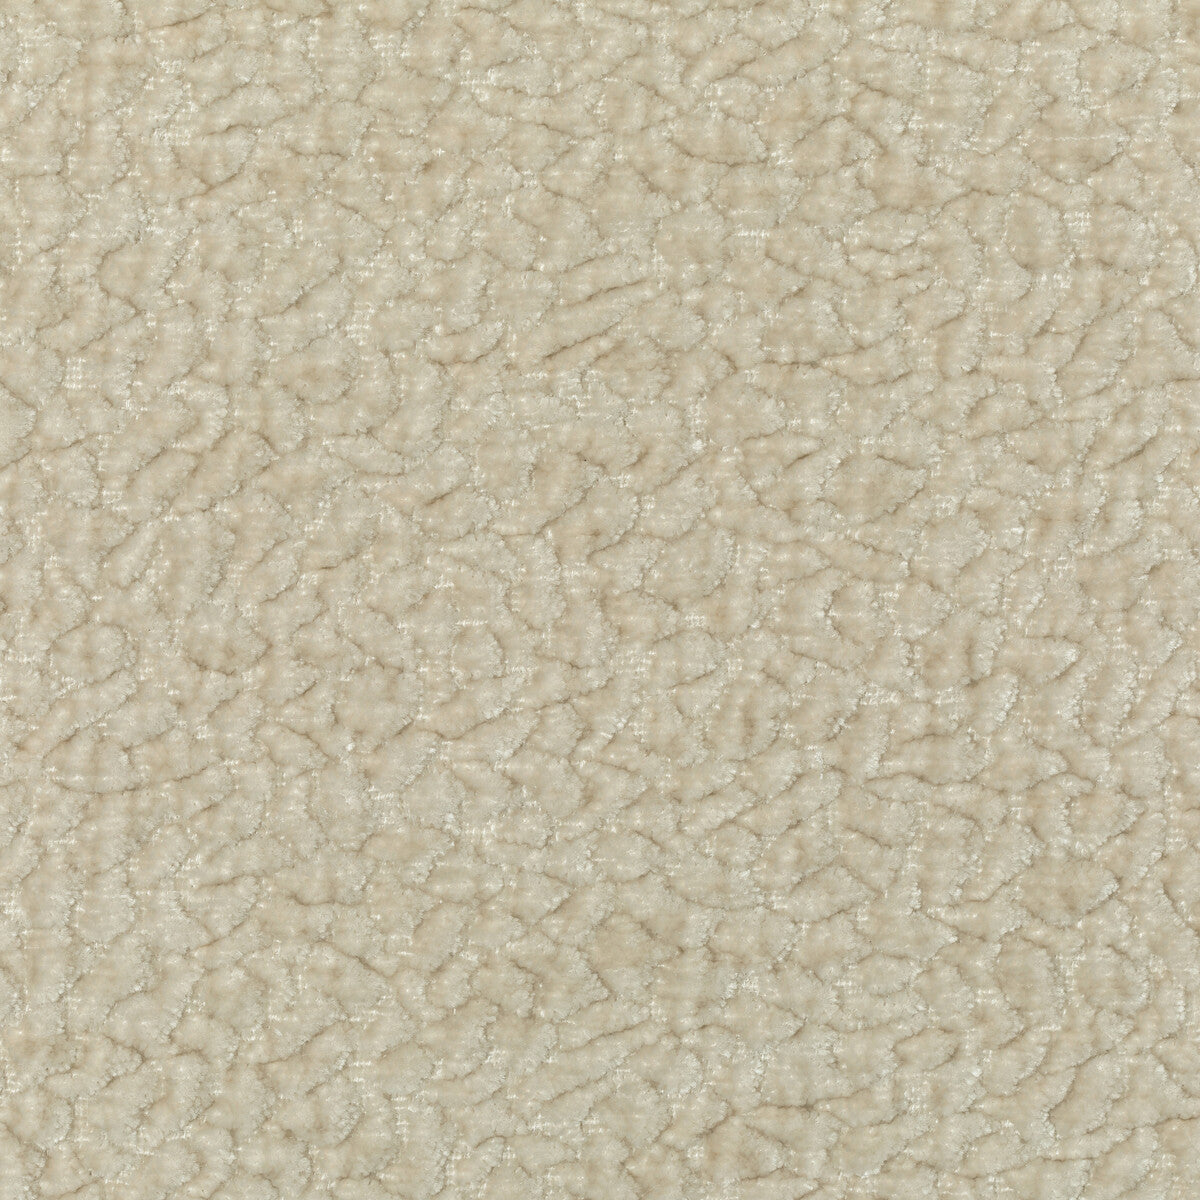 Kravet Couture fabric in 36596-1 color - pattern 36596.1.0 - by Kravet Couture in the Mabley Handler collection